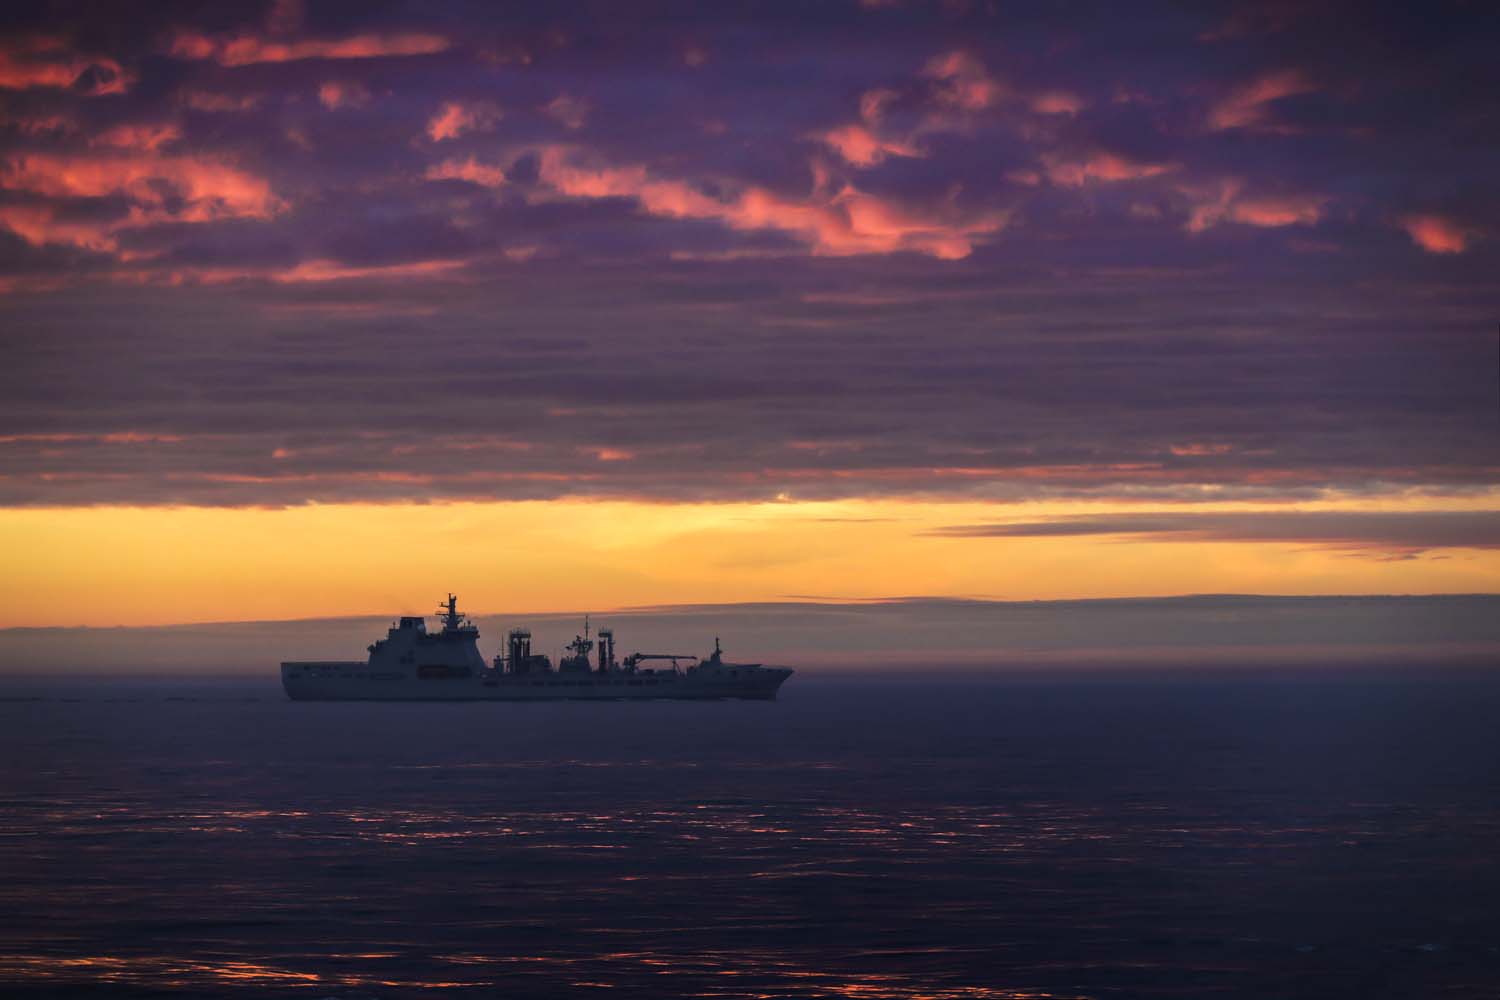 RFA Tideforce during work with NATO